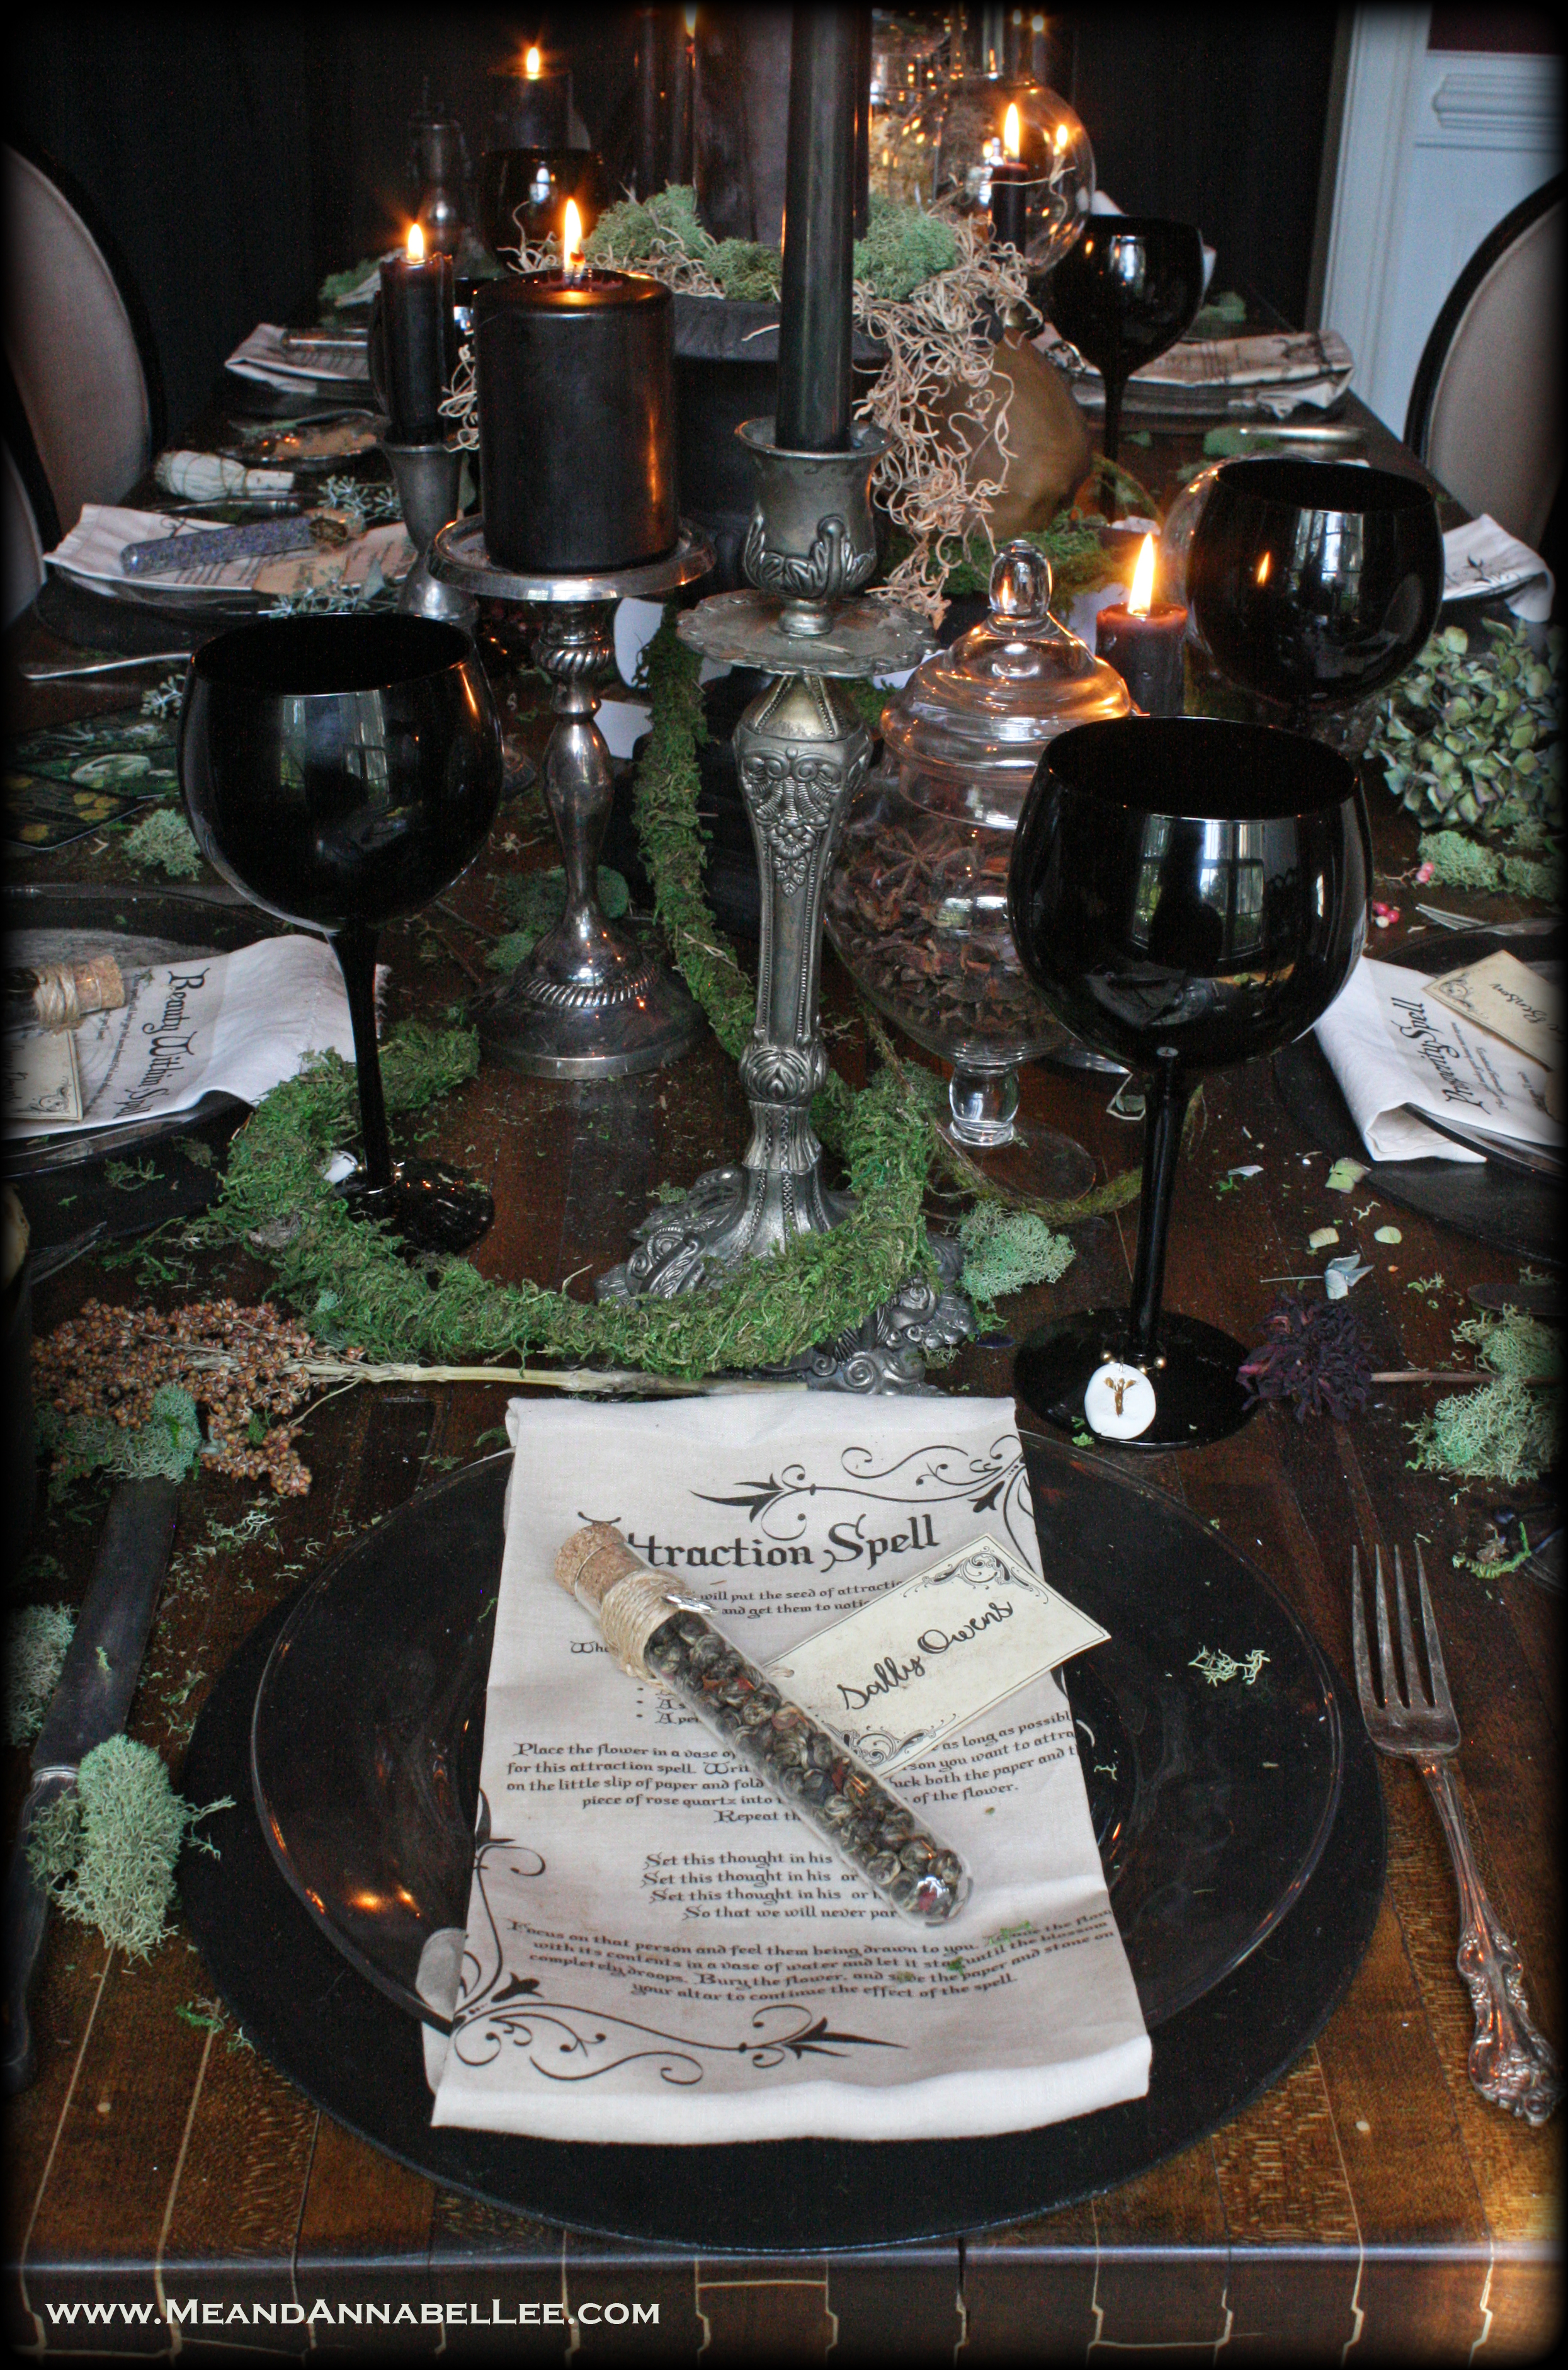 Witches Dinner Party | Mossy Vines | Elegant Gothic Halloween Table Setting | DIY Magic Spell Napkins | Loose Leaf Tea Apothecary Vials | Rune Stone Wine Charms | Black Candlelit Dinner | www.MeandAnnabelLee.com